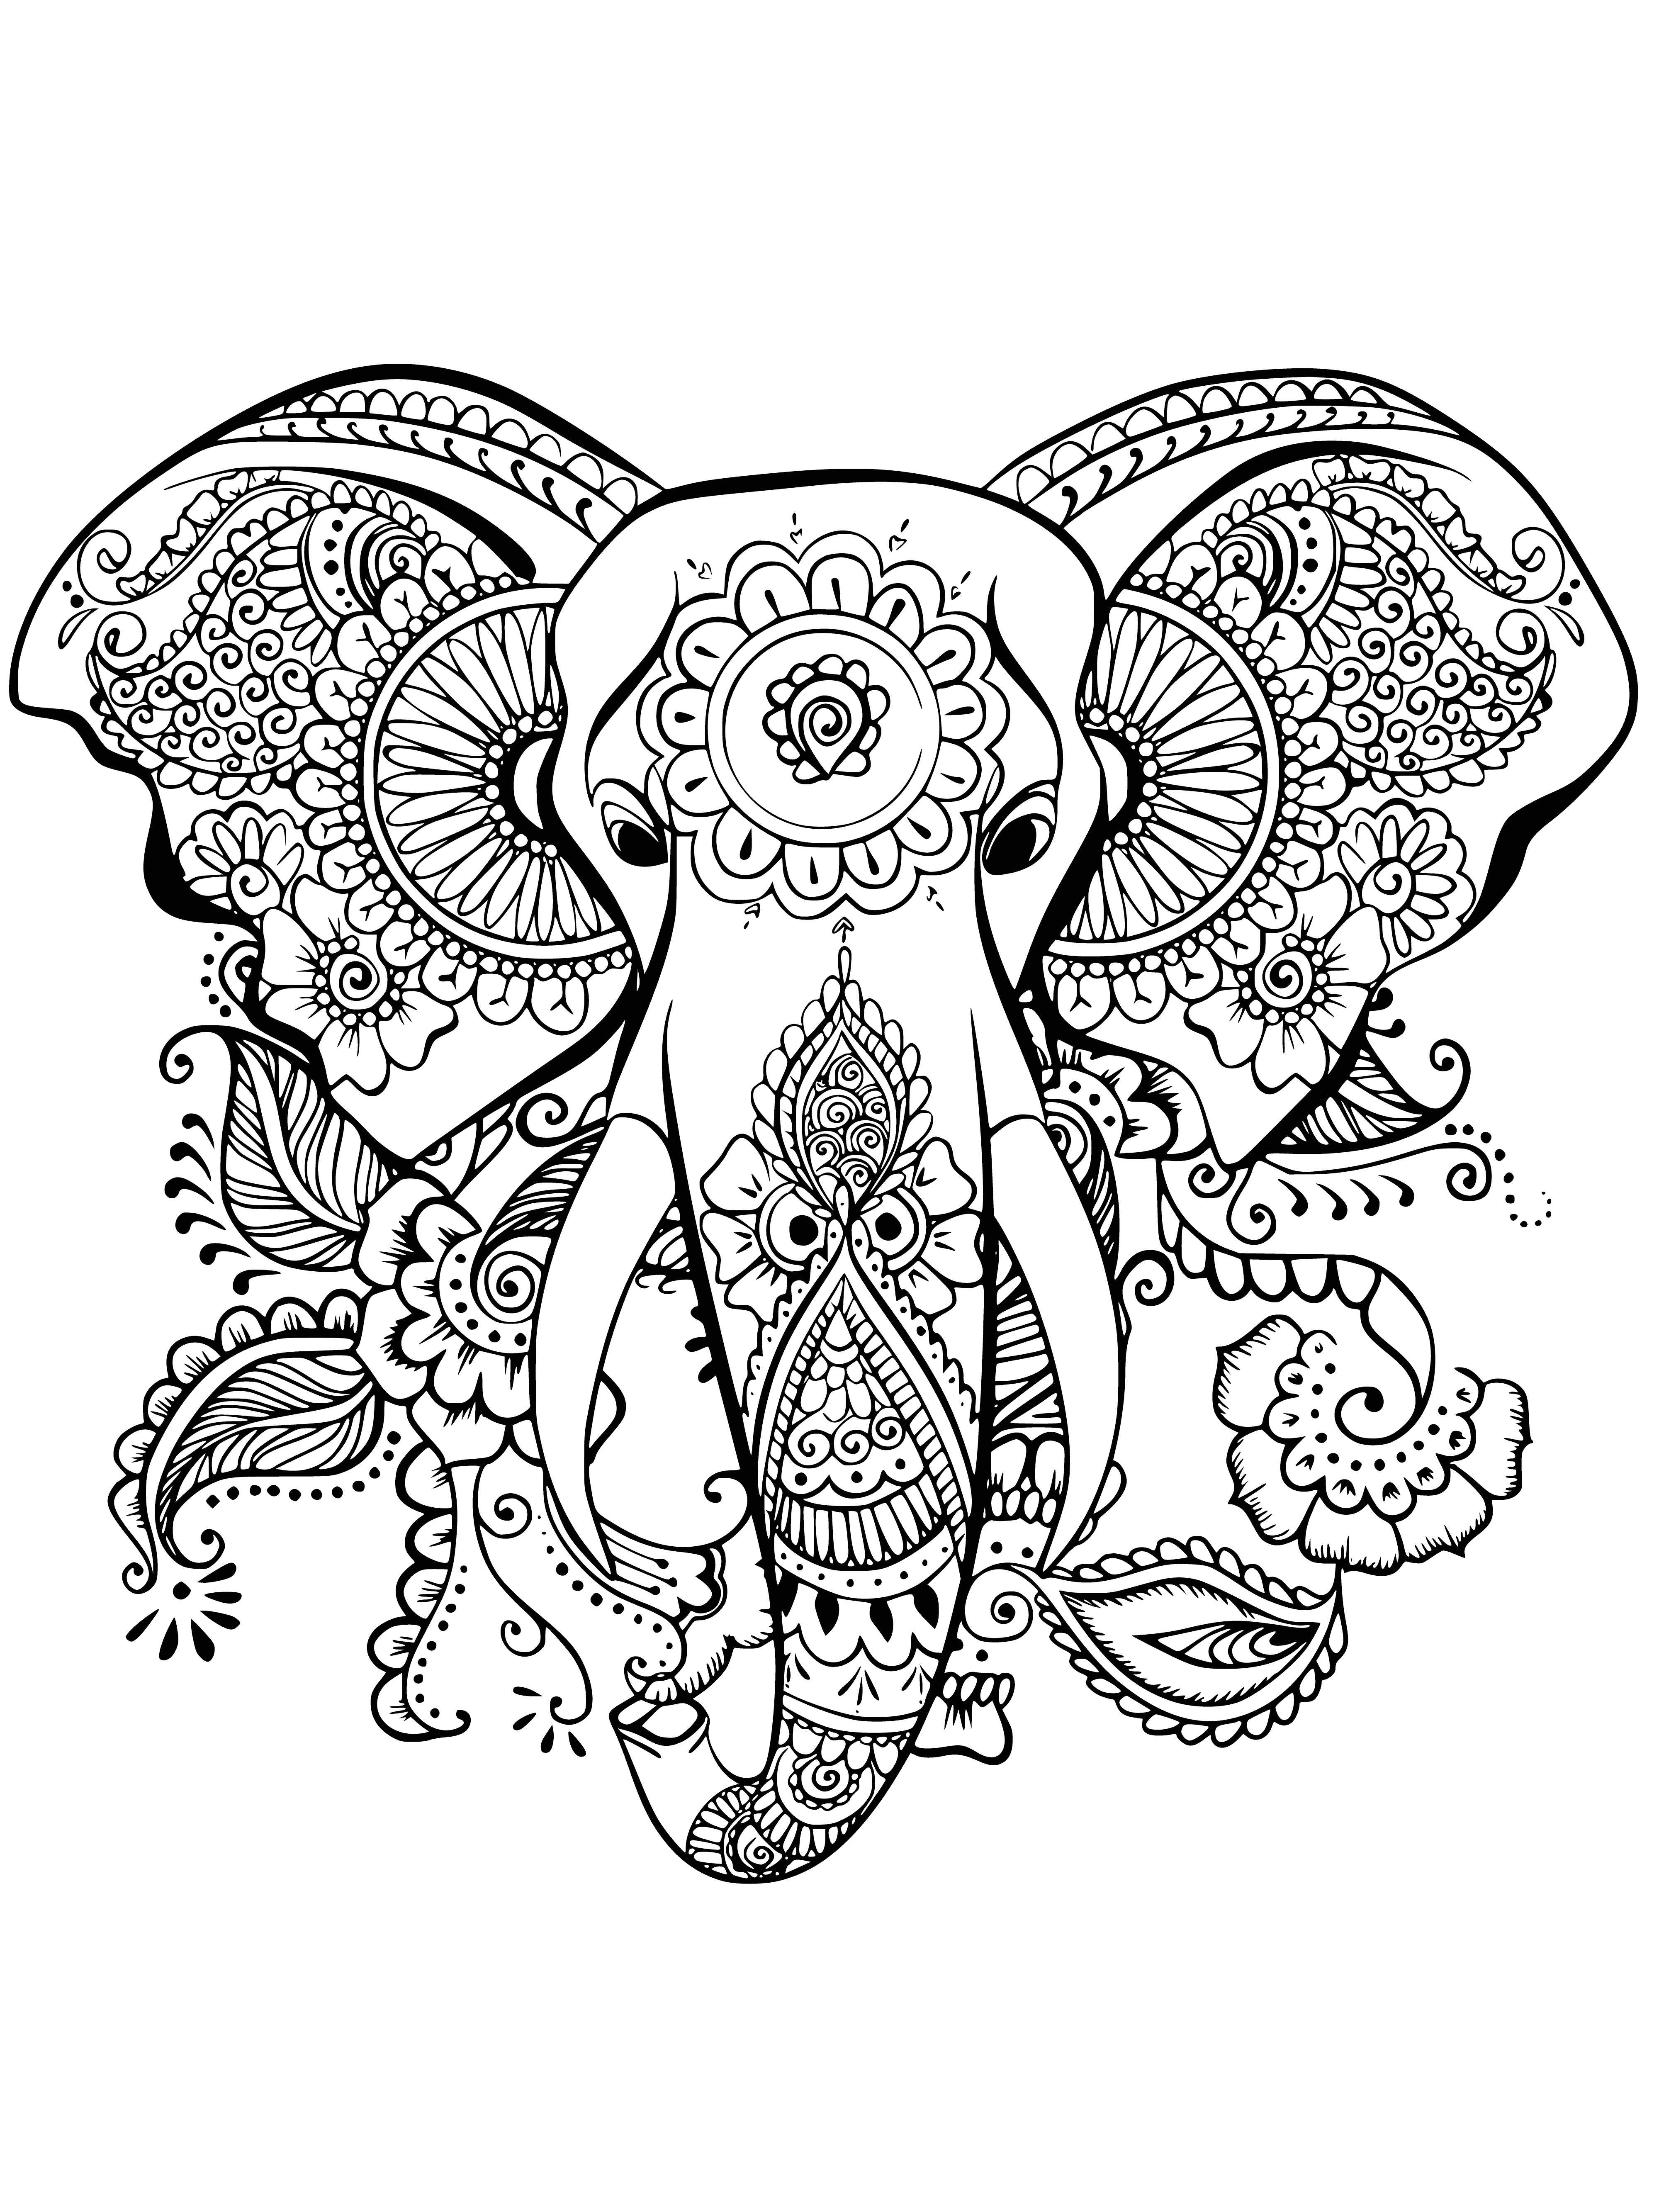 coloring page: Large gray elephant with black spots, long curved trunk, 2 small eyes, white tusks, and a big mouth.